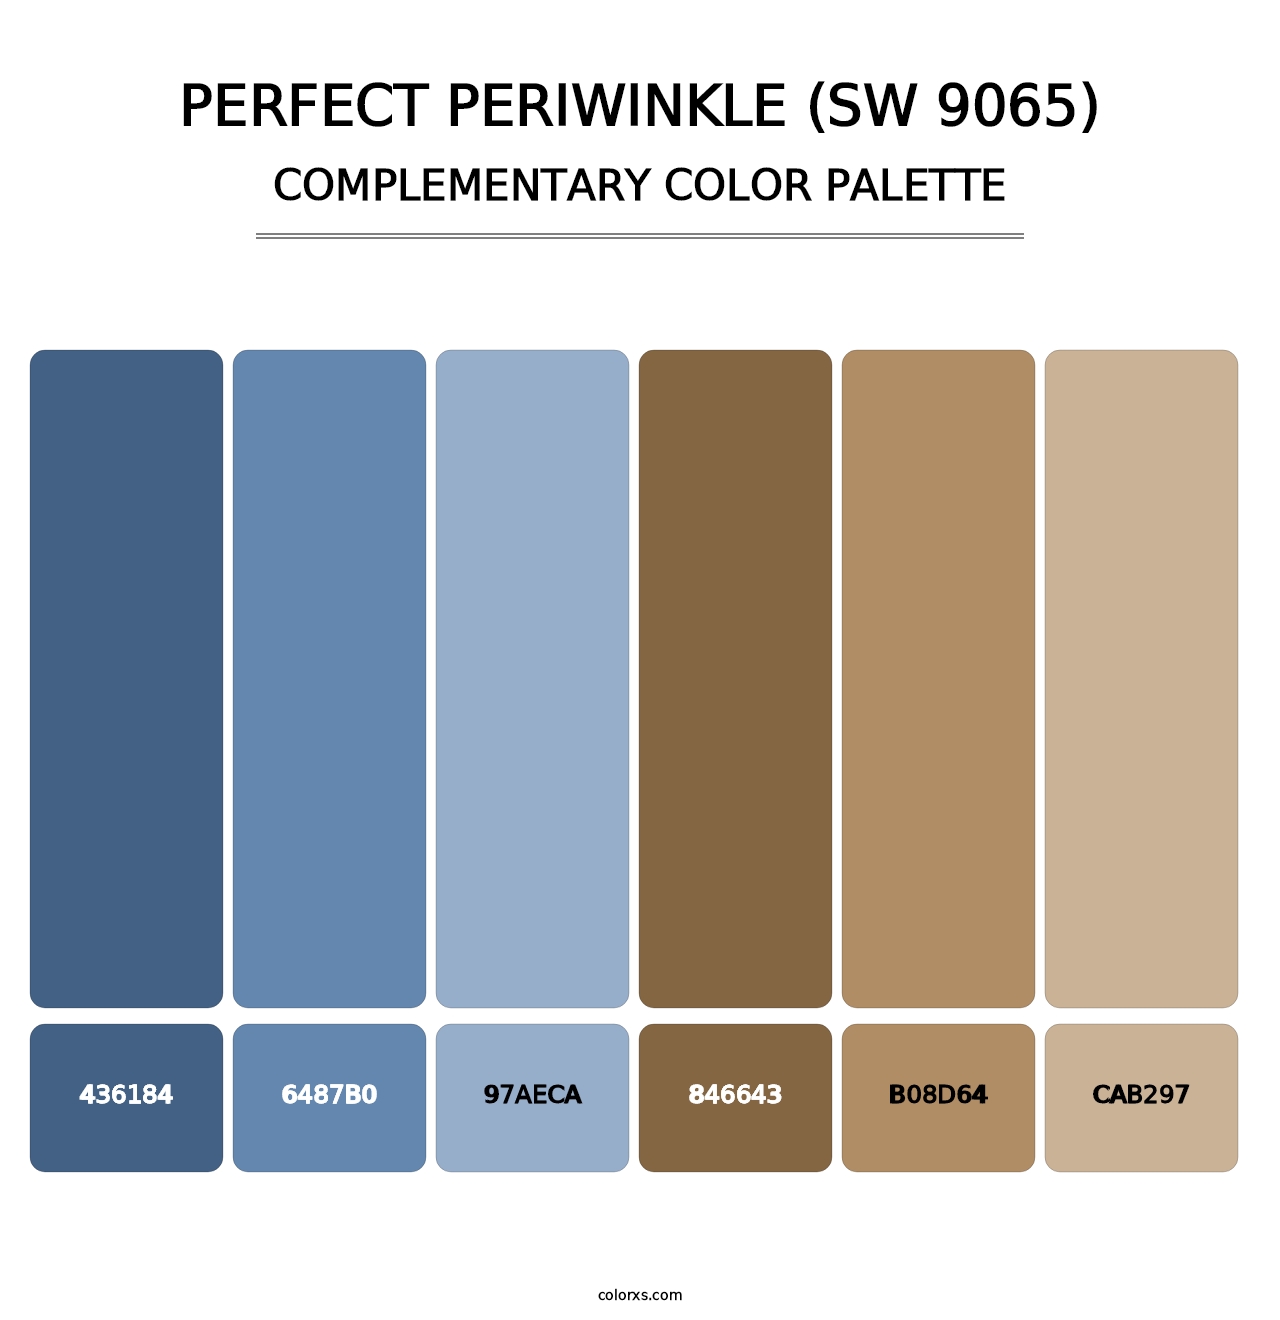 Perfect Periwinkle (SW 9065) - Complementary Color Palette